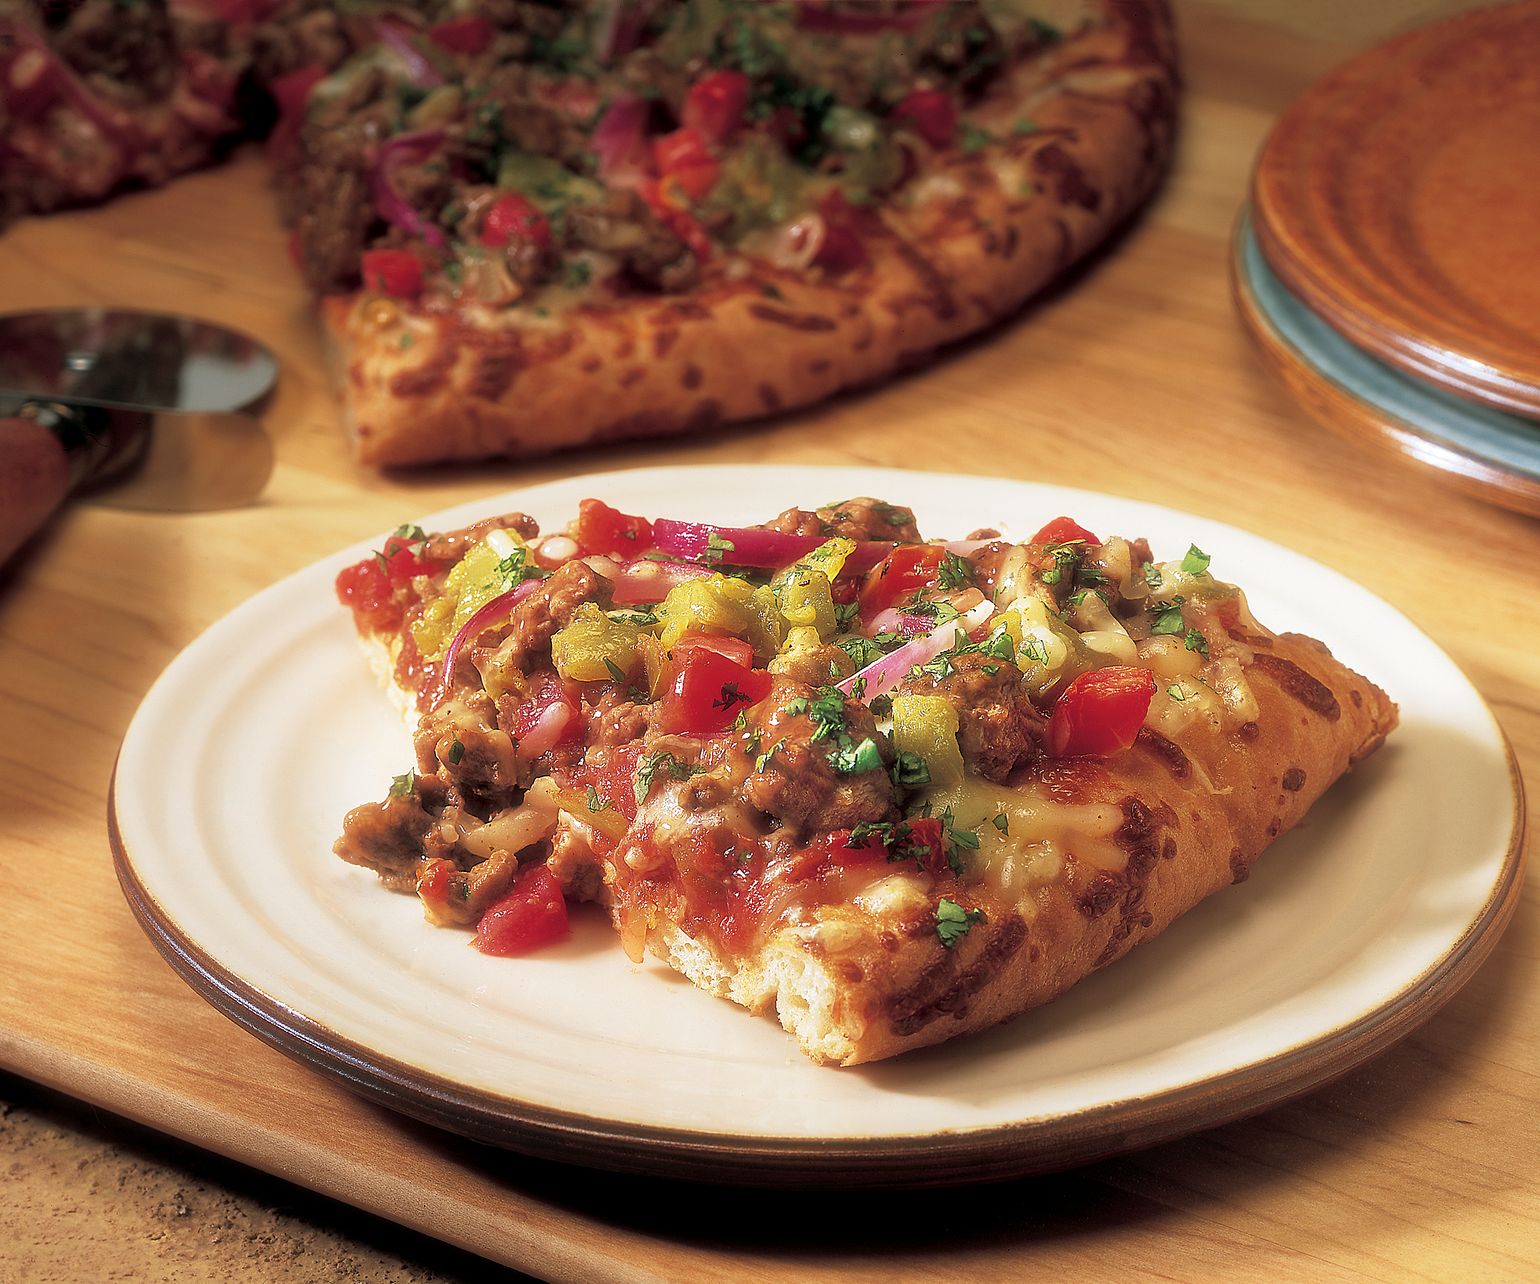 Southwest Beef & Chile Pizza